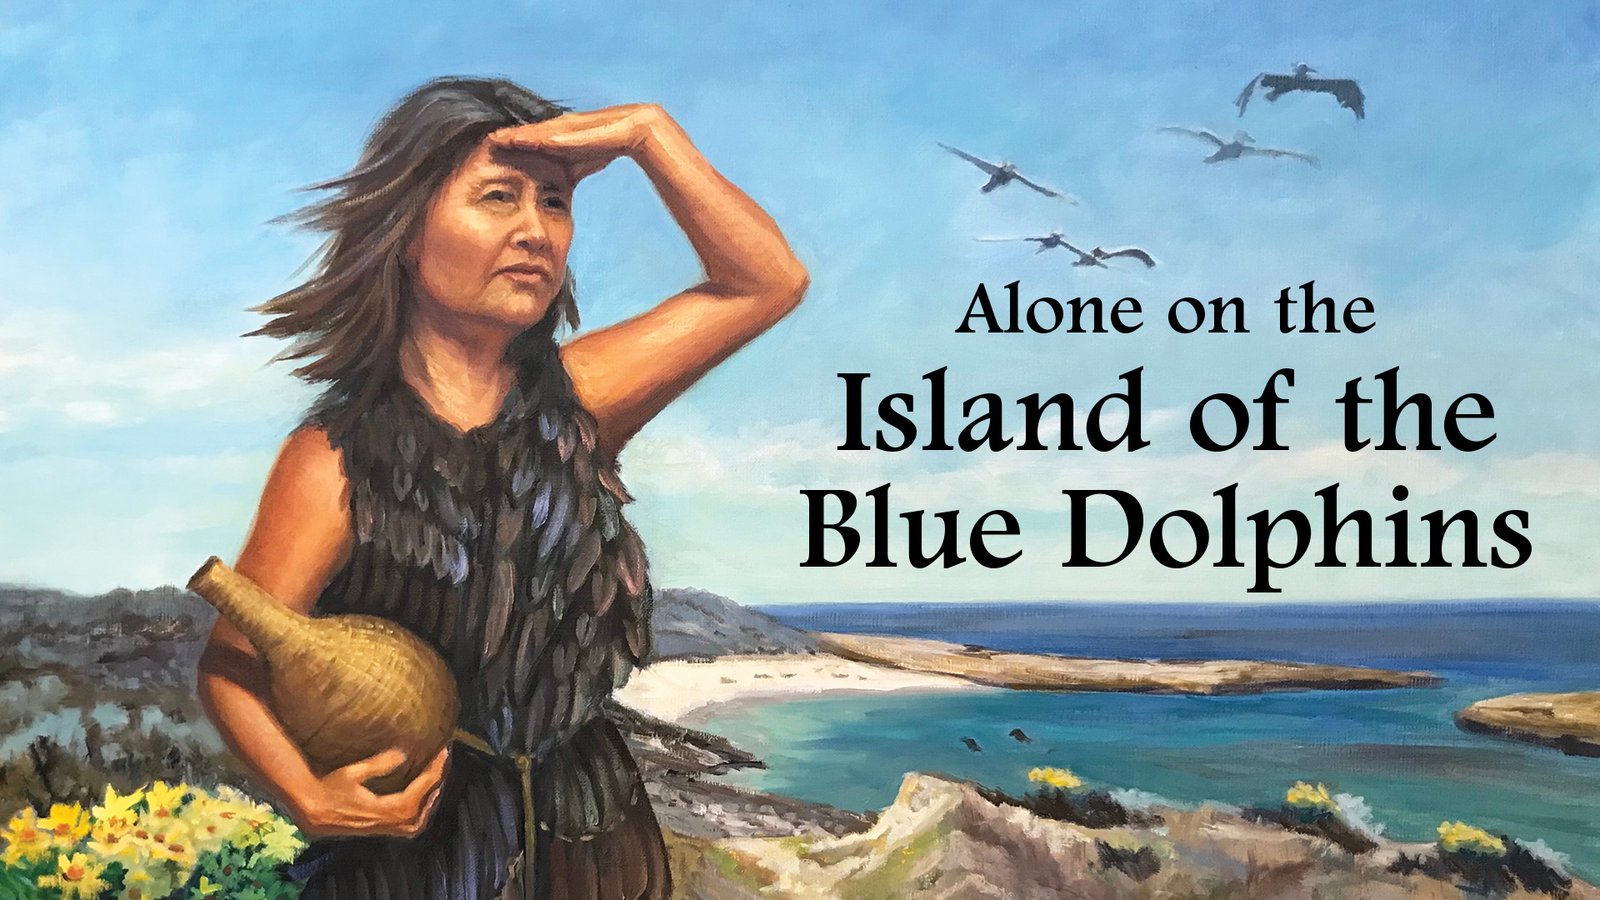 Alone on the Island of the Blue Dolphins - The Story Behind the Famous Children's Book